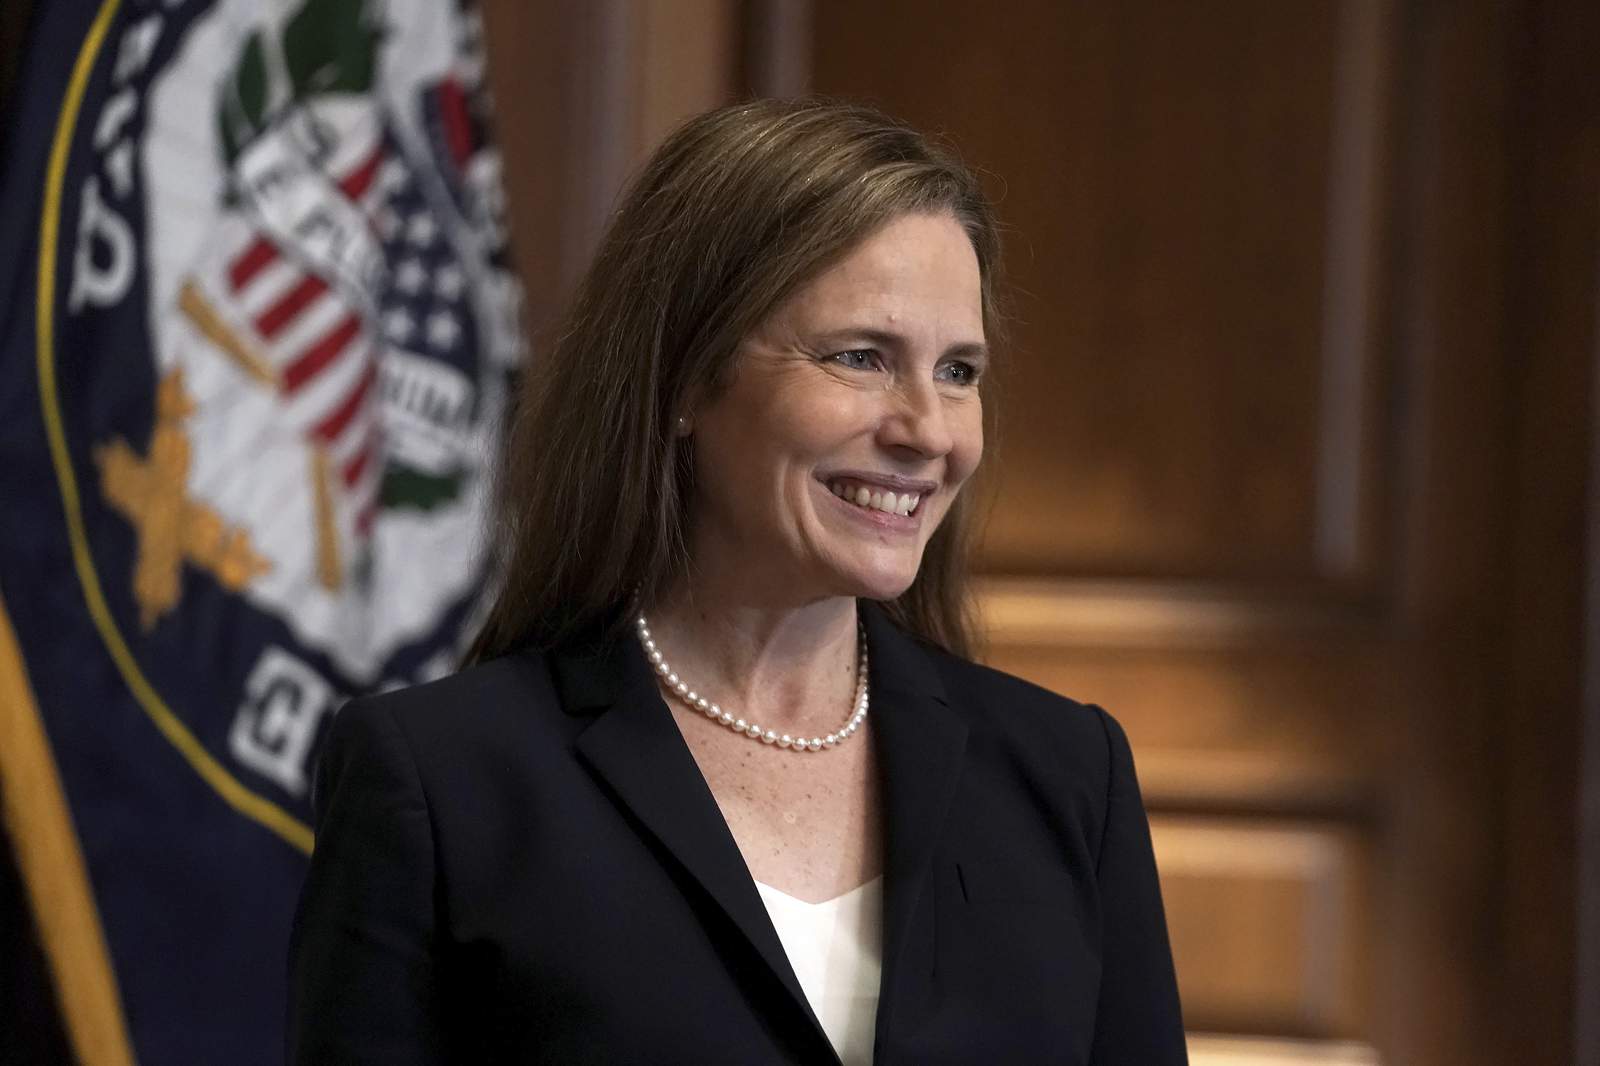 Amy Coney Barrett sworn in as Supreme Court justice replacing liberal icon Ruth Bader Ginsburg